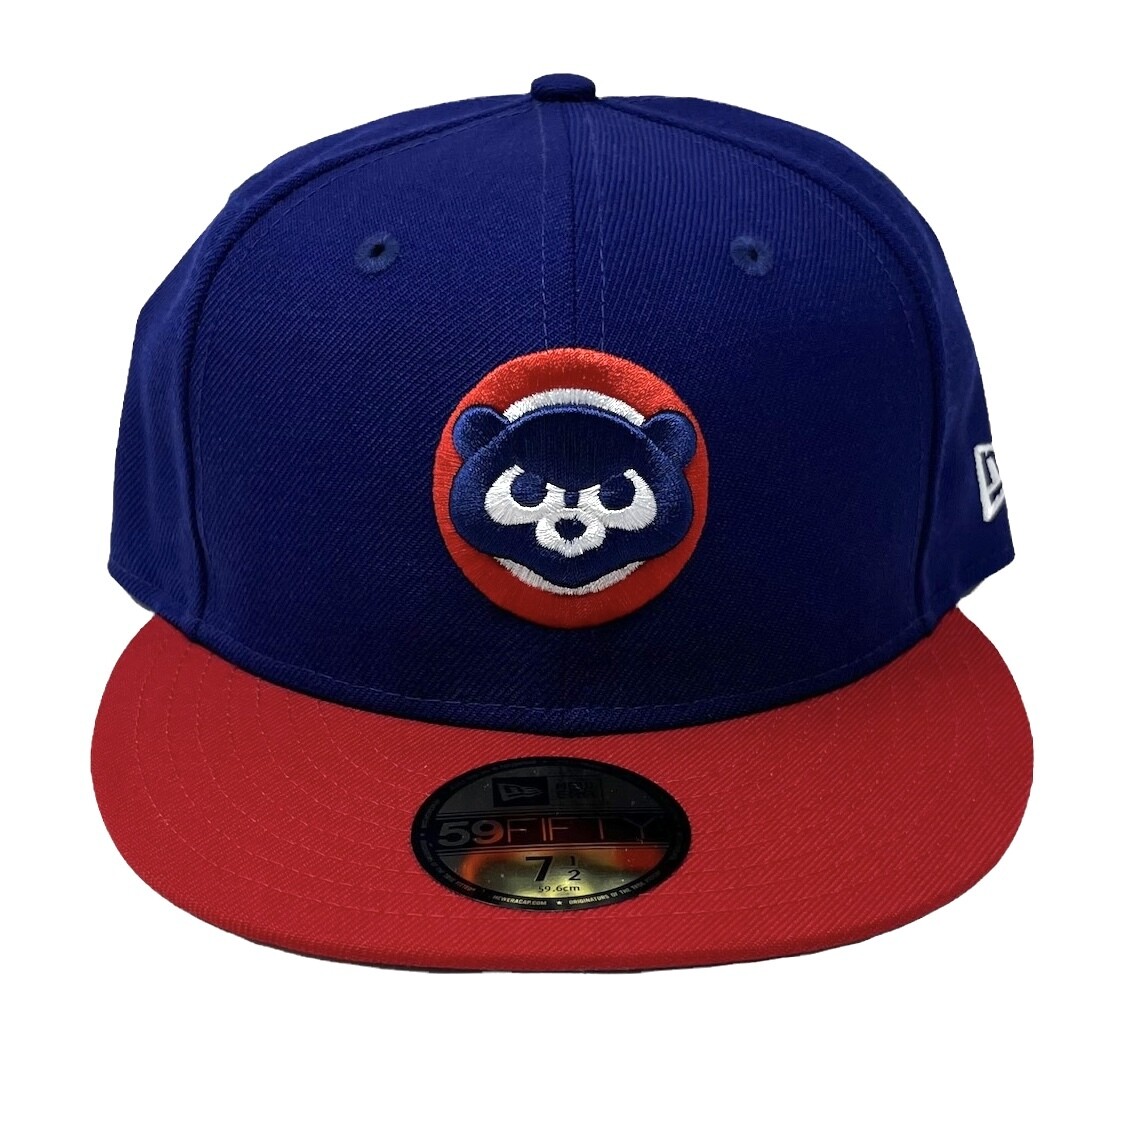 Men’s Chicago Cubs Royal Centennial Collection Cooperstown 59FIFTY Fitted Hats